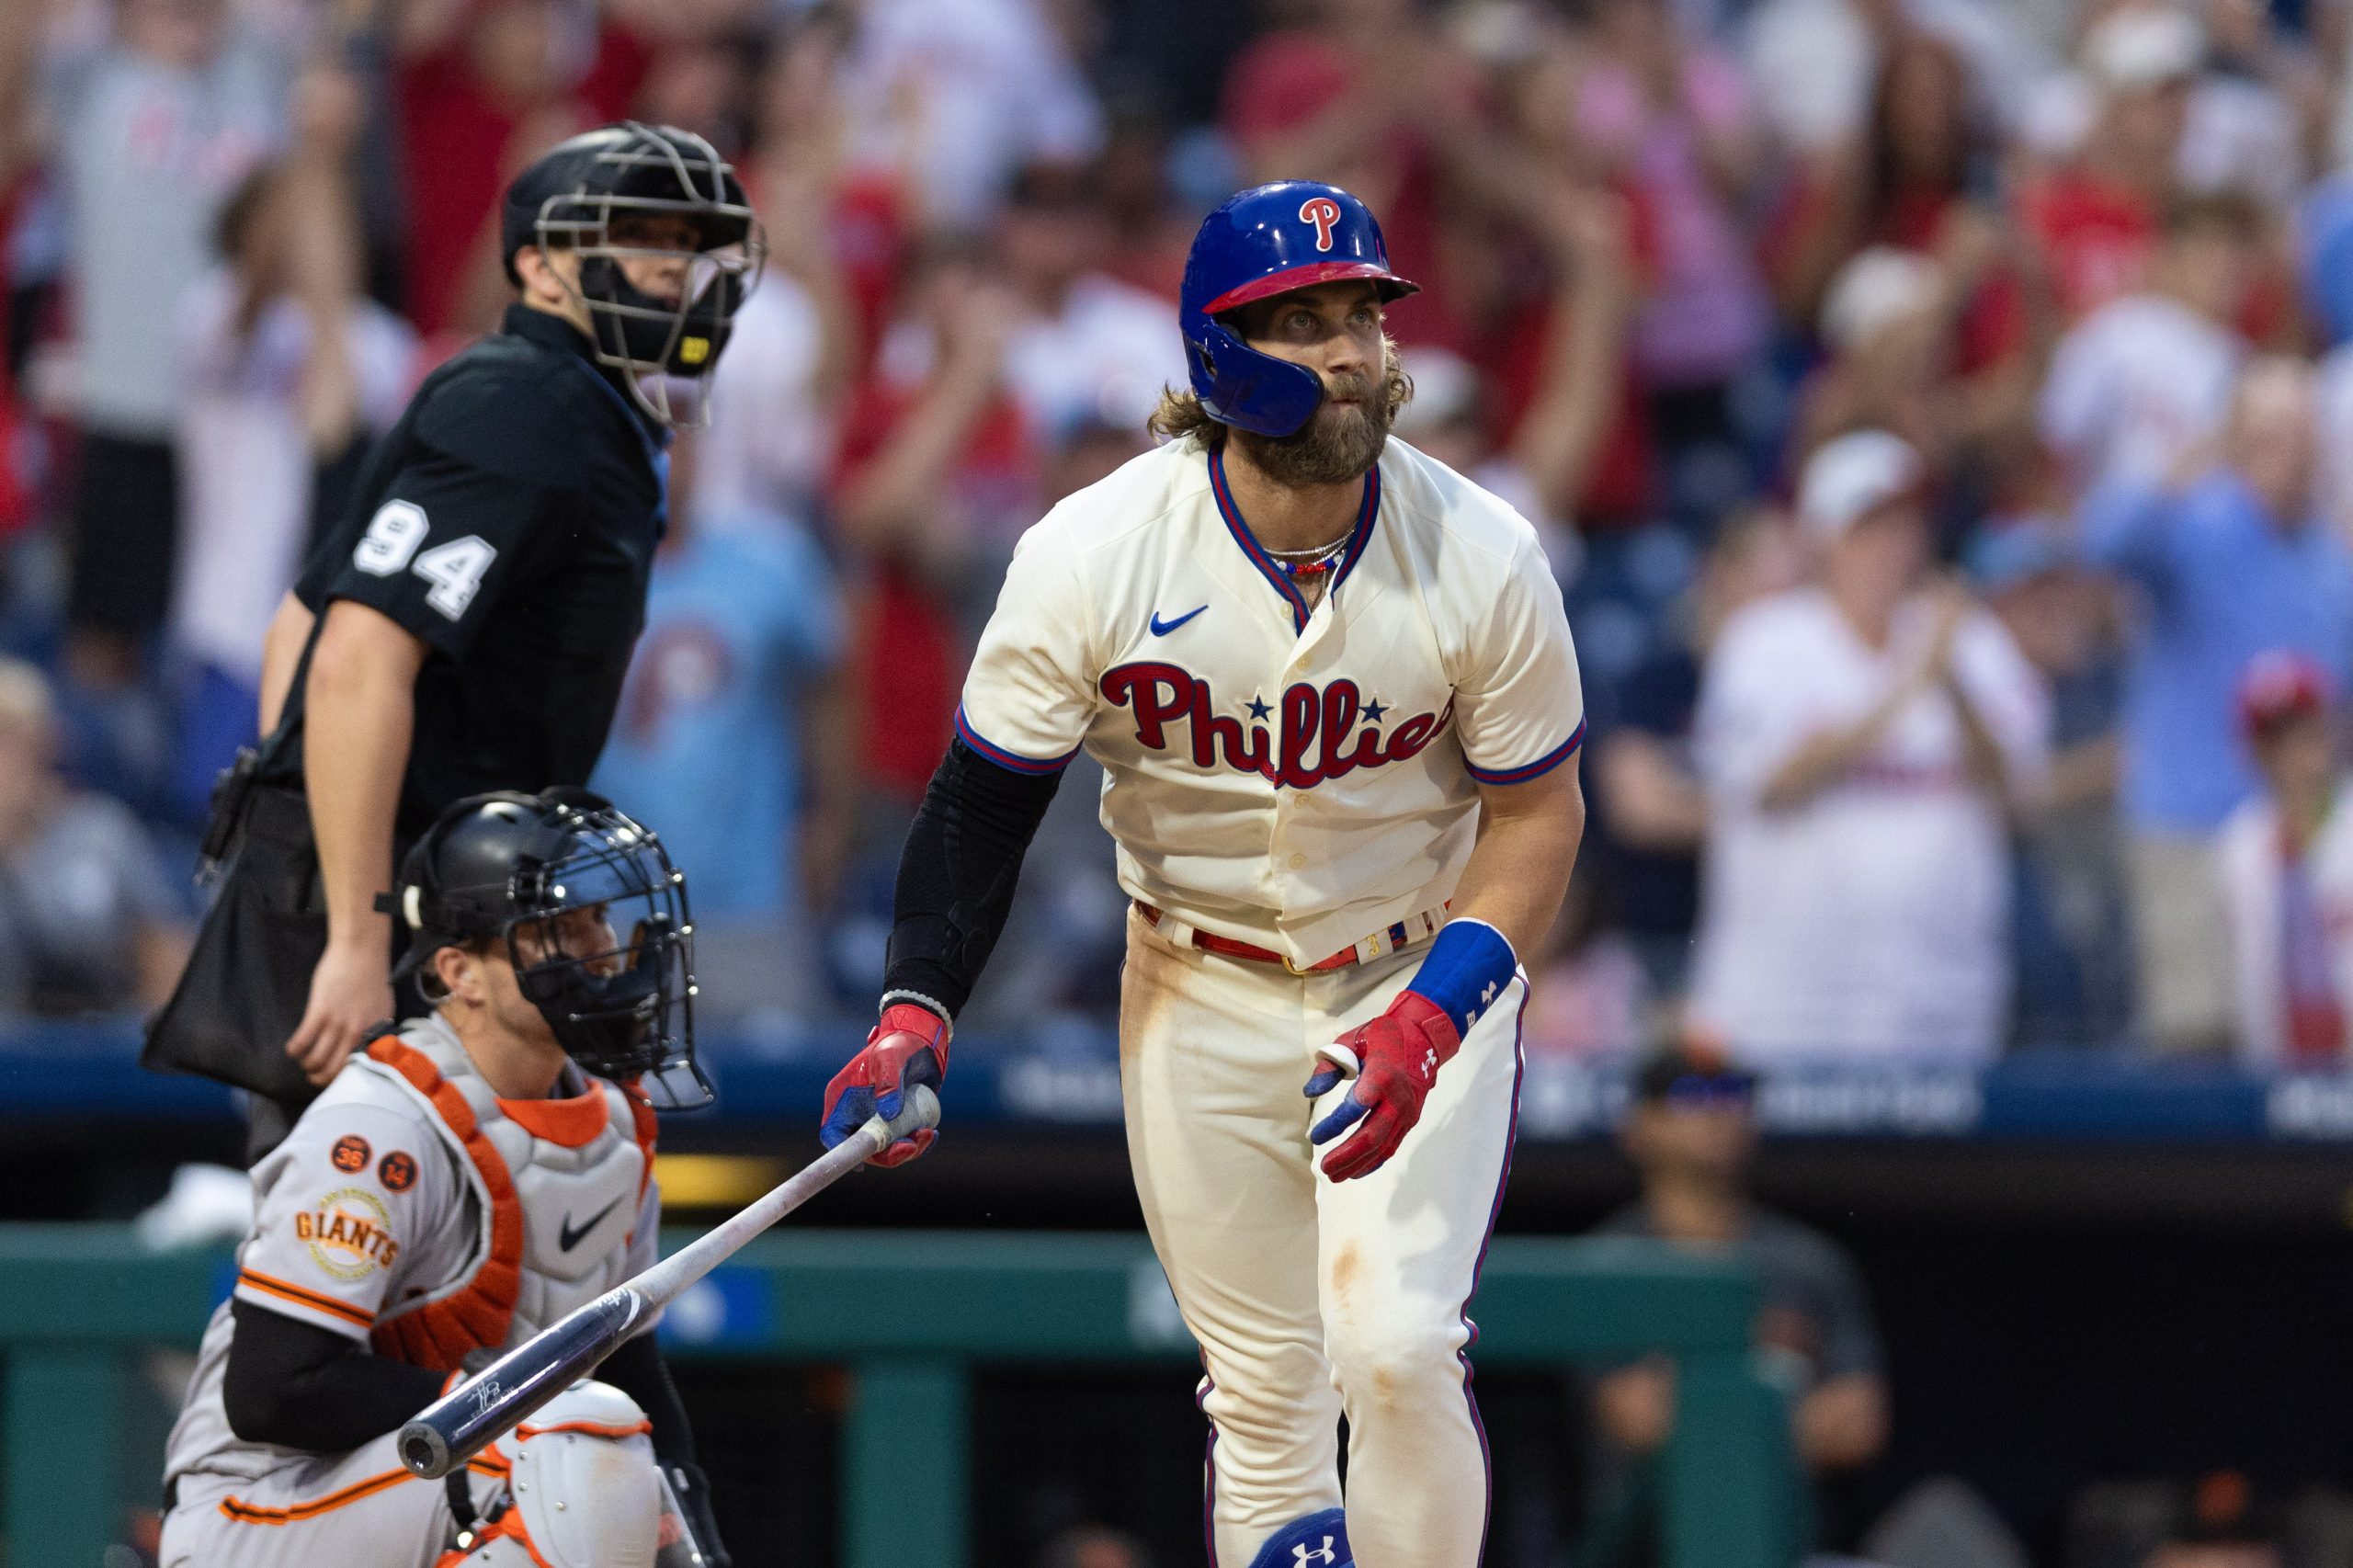 The Bryce Harper boon for Phillies should last a while, as it did